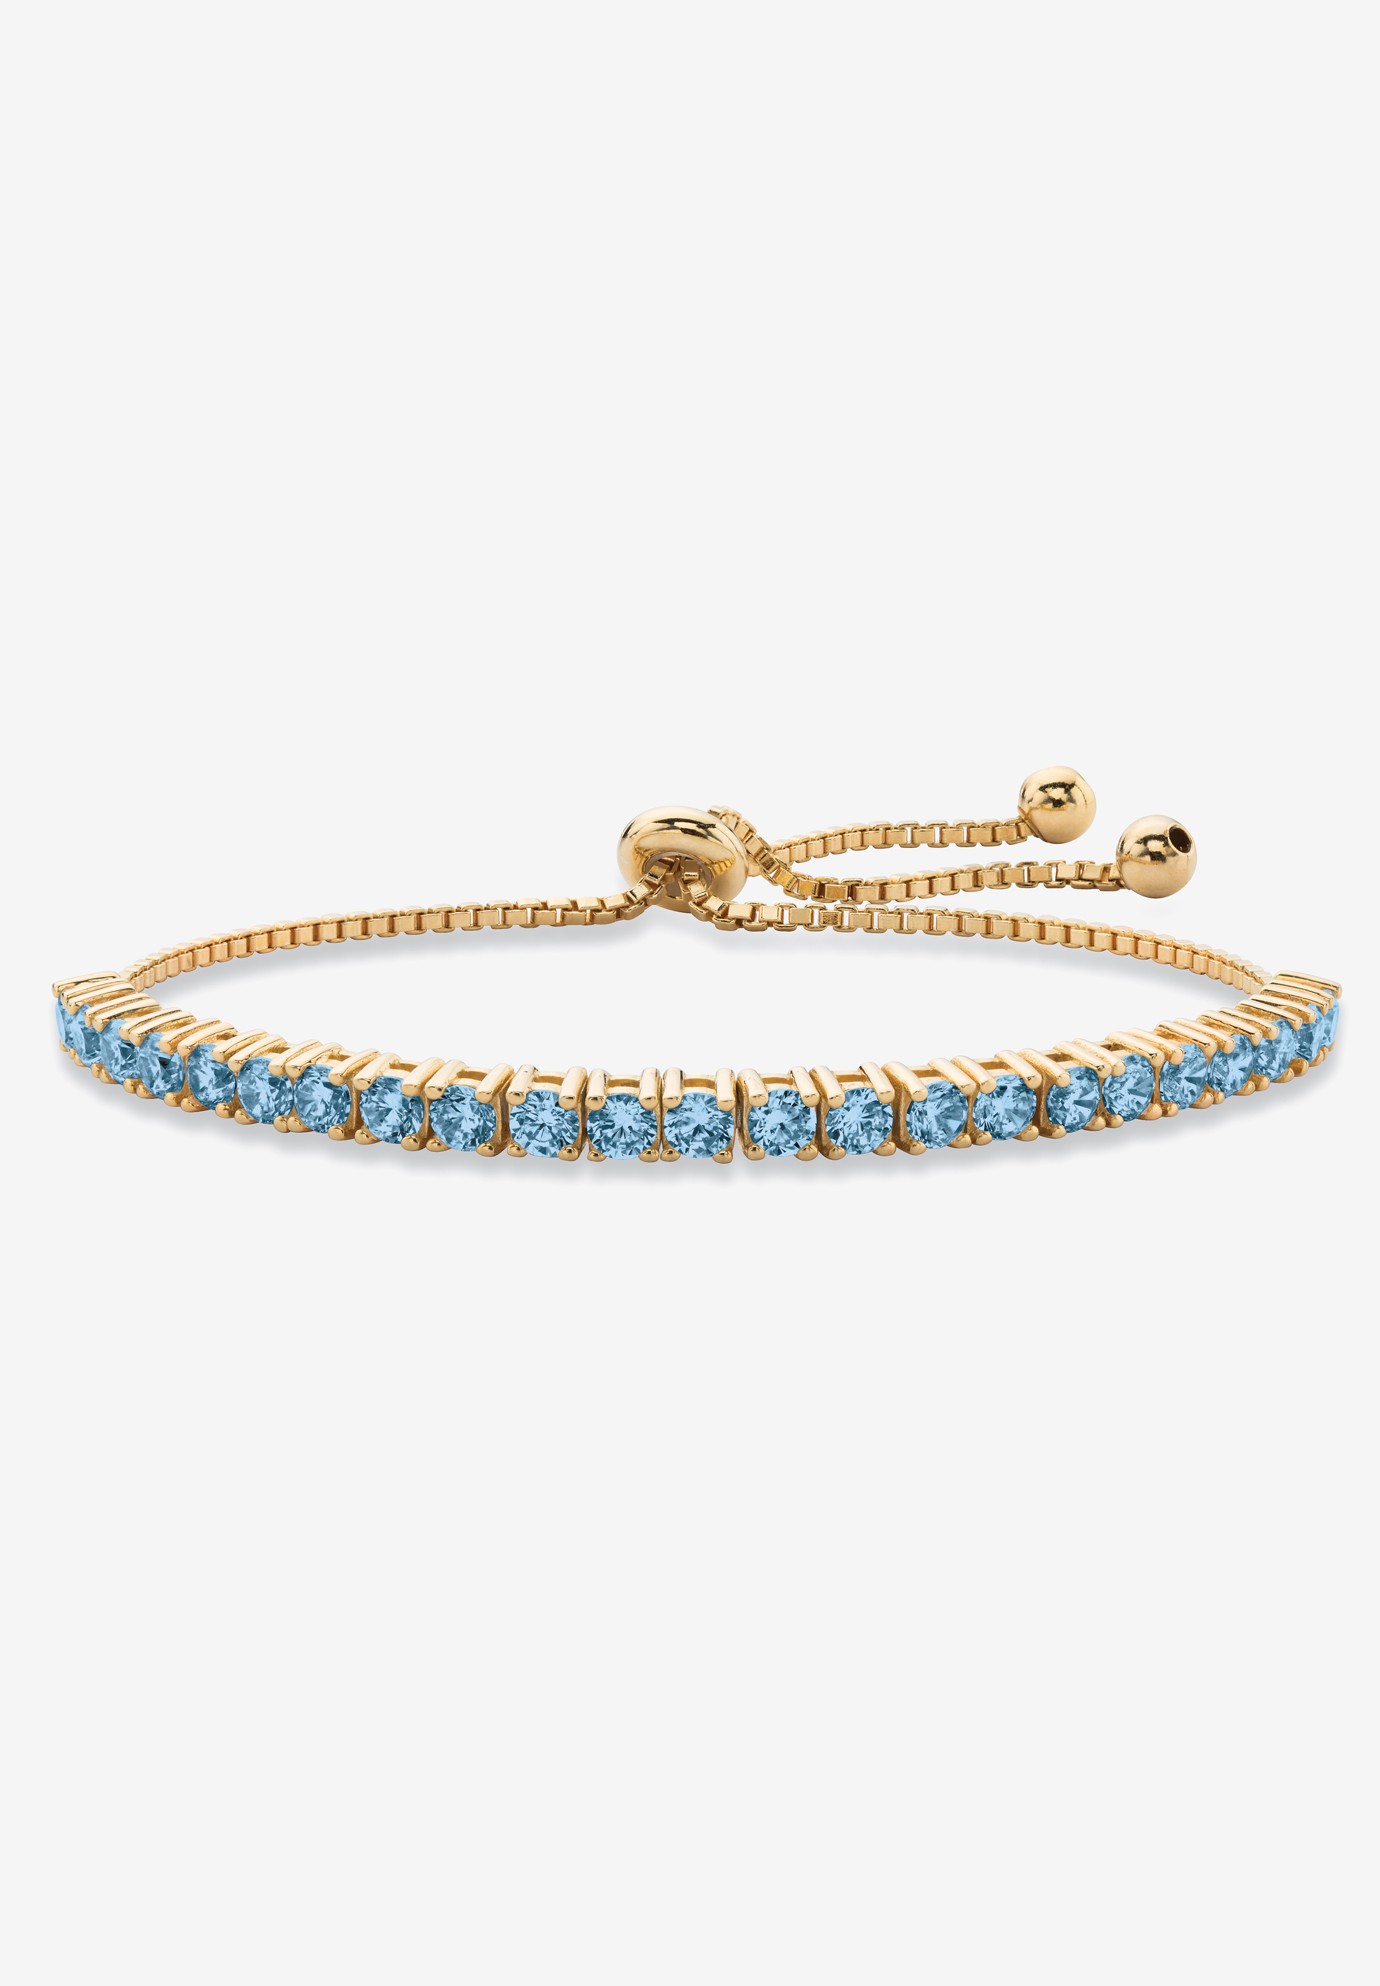 Gold-Plated Bolo Bracelet, Simulated Birthstone 9.25